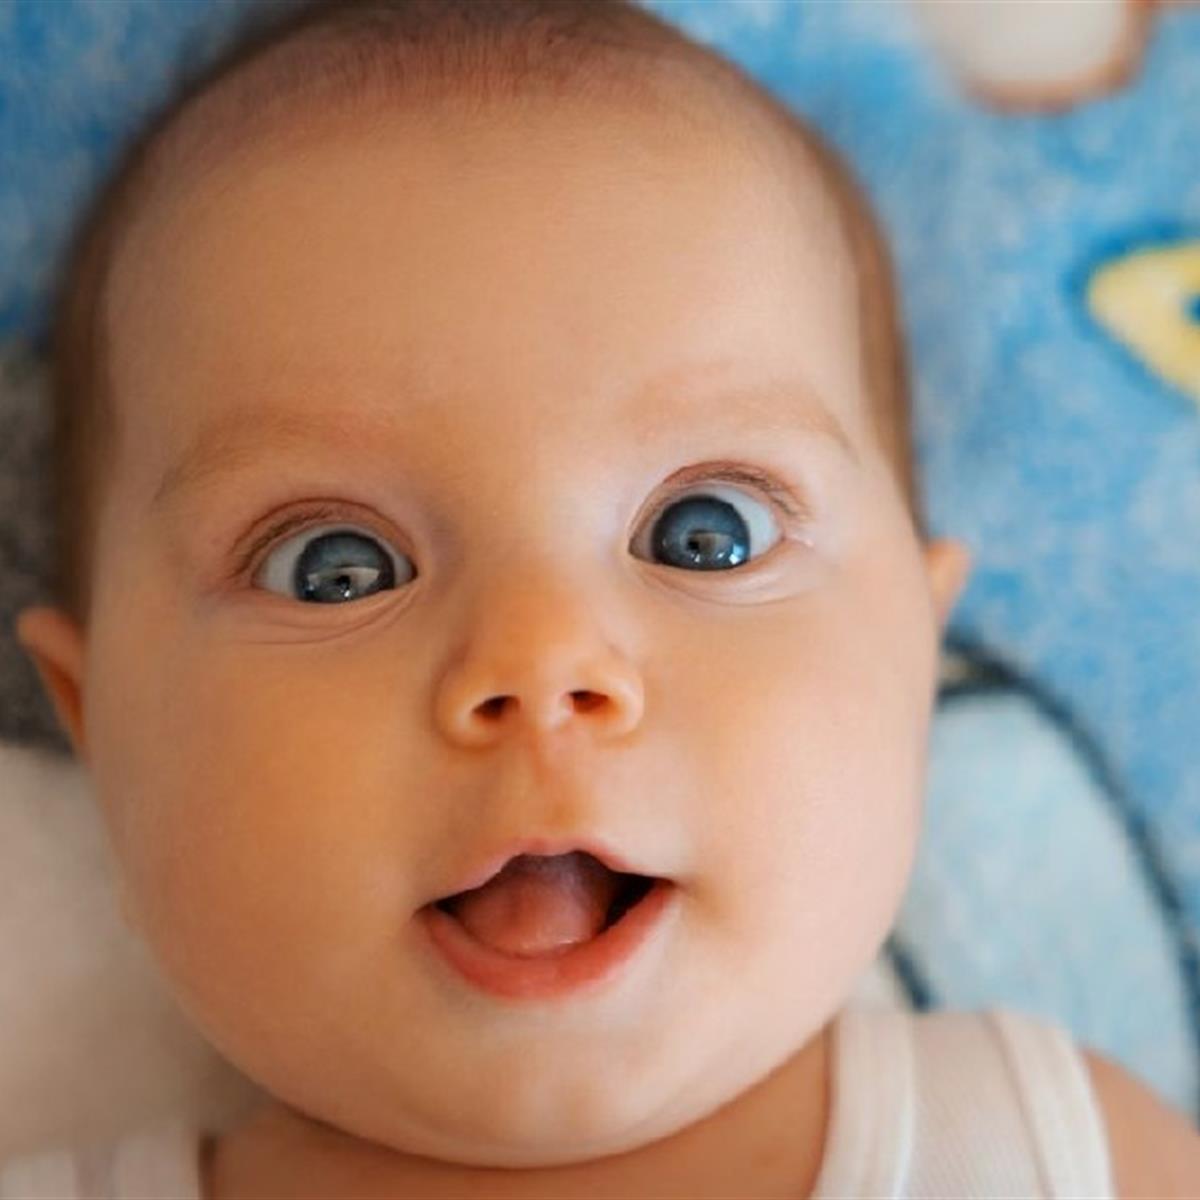 Rute Anmeldelse Bevæger sig ikke What Color Will My Baby's Eyes Be? - HealthyChildren.org